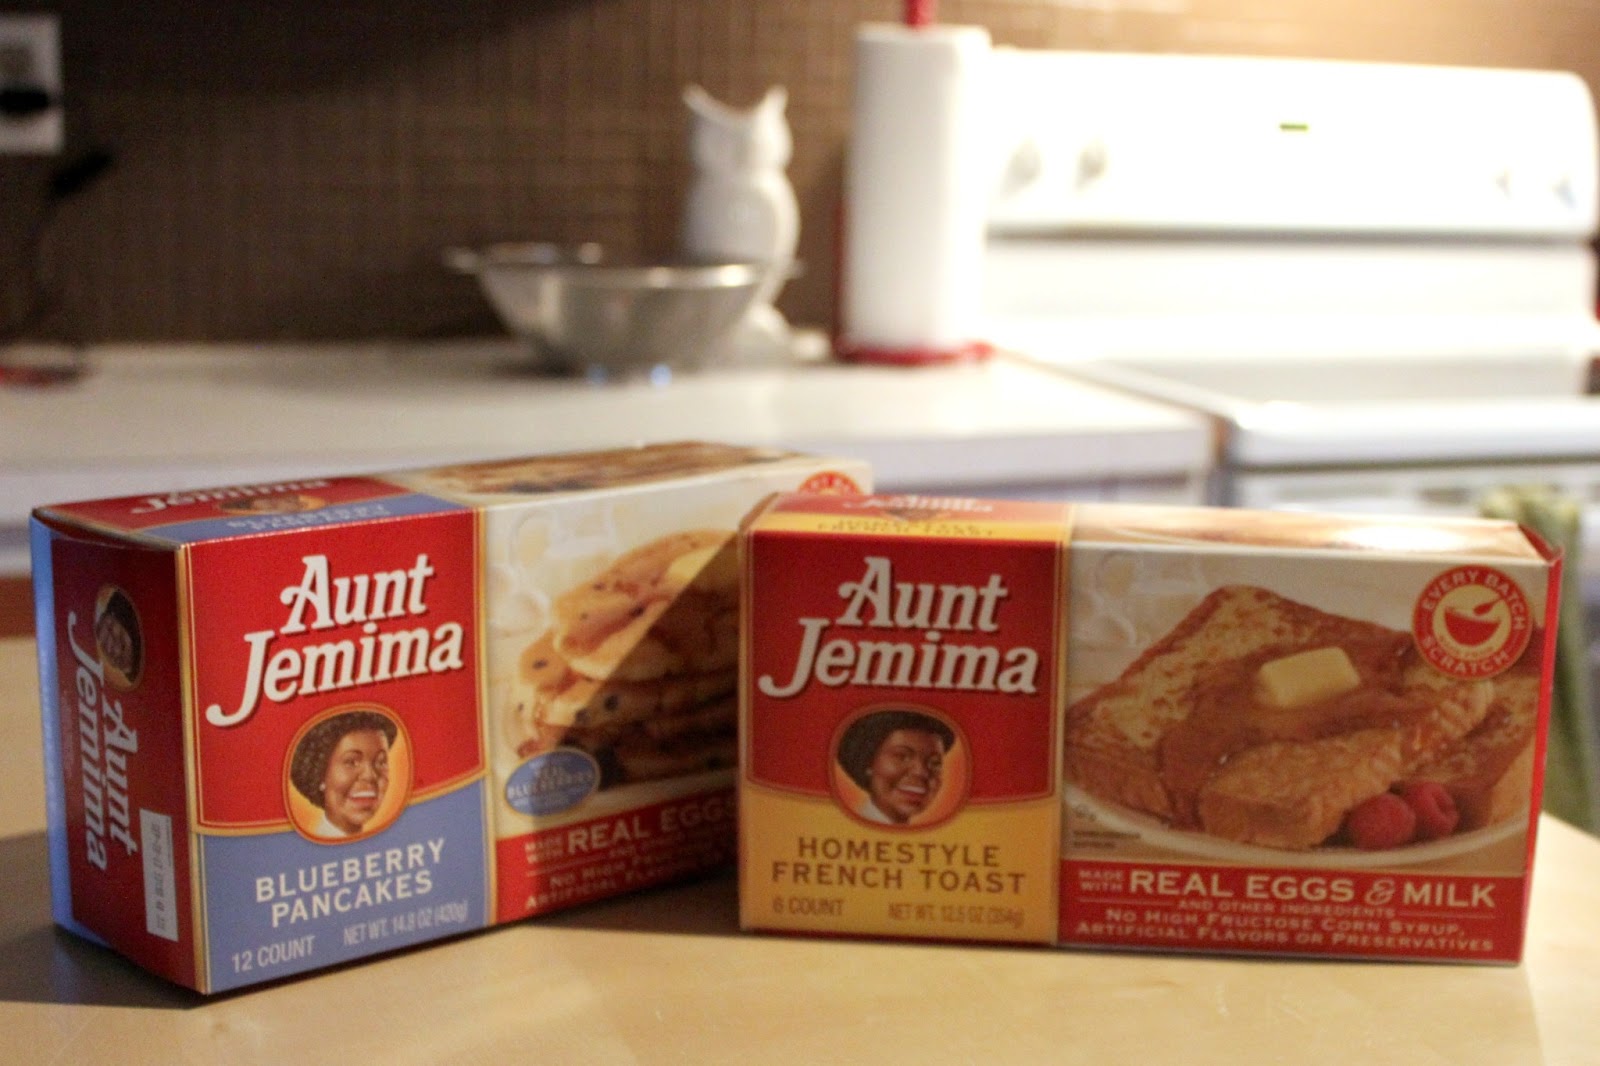 pancakes to aunt up make how pancakes french and I jemima the picked milk grocery, blueberry toast their with